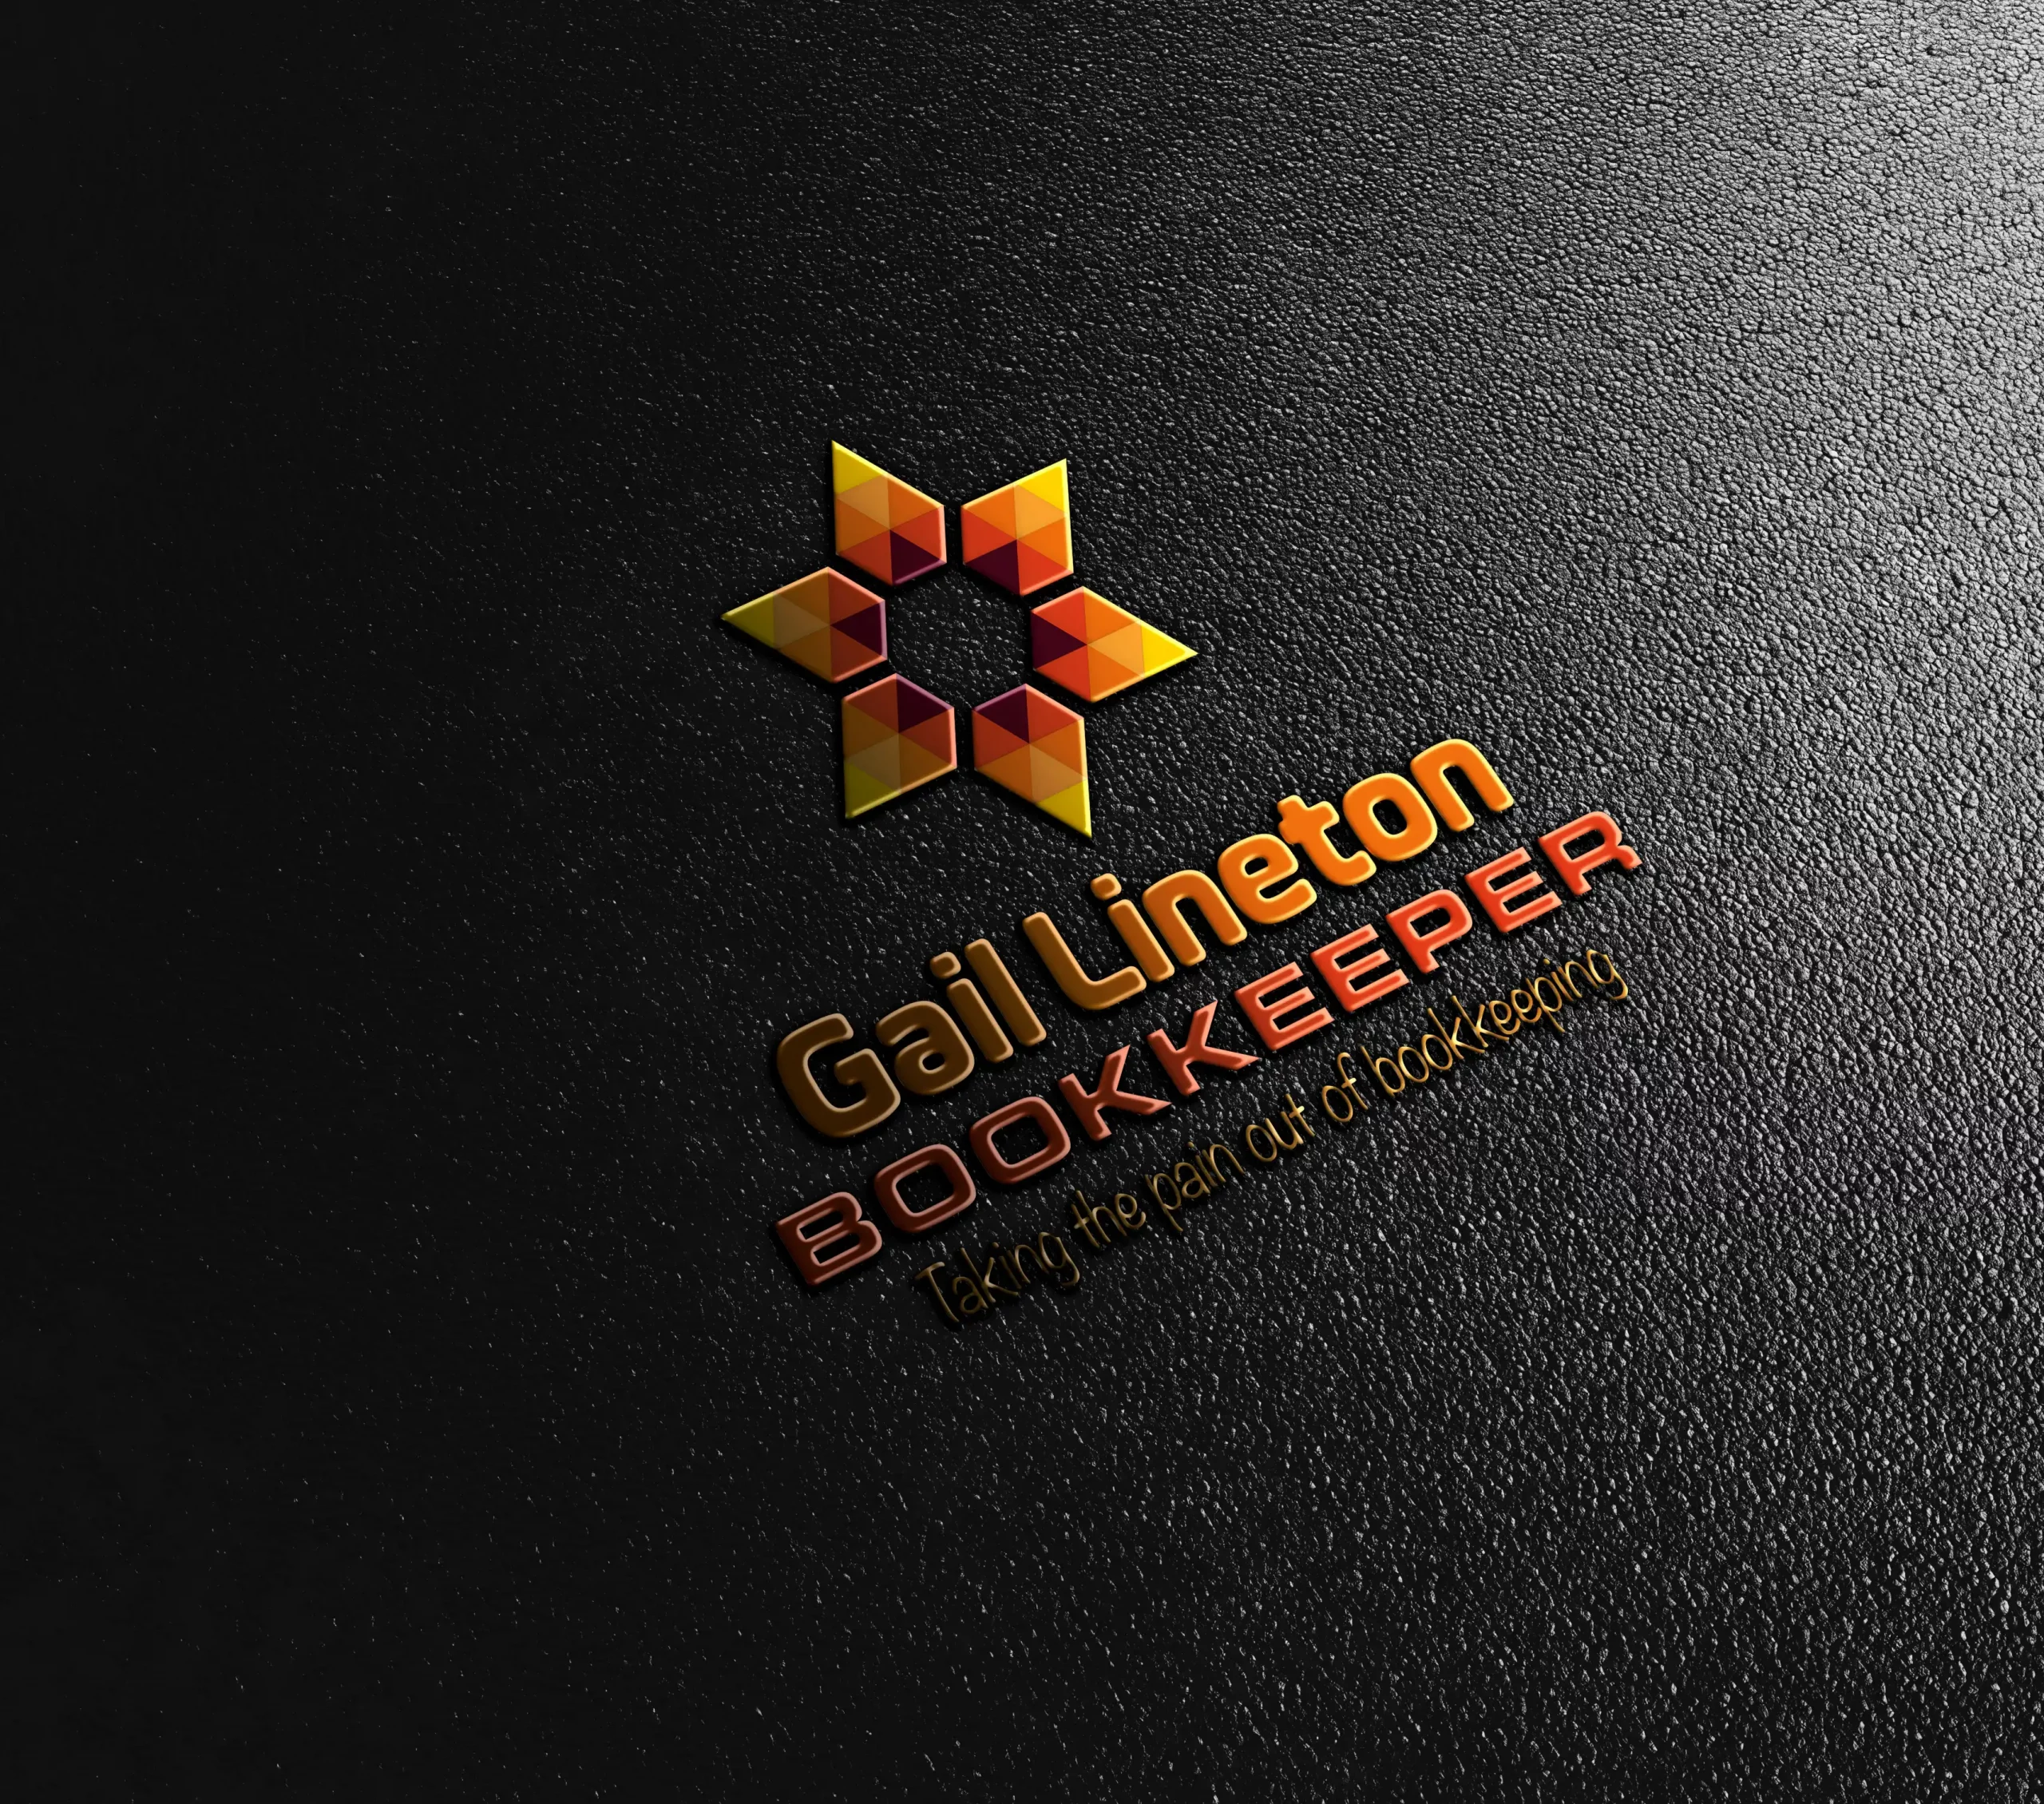 Logo Making made easy for Gail Lineton Bookkeeper in Weedons, Selwyn, Christchurch, Canterbury, NZ. A formal, old styled modernised geometric Logo Design made by XDC.NZ, the super experienced, Logo Maker based in Christchurch & Rolleston